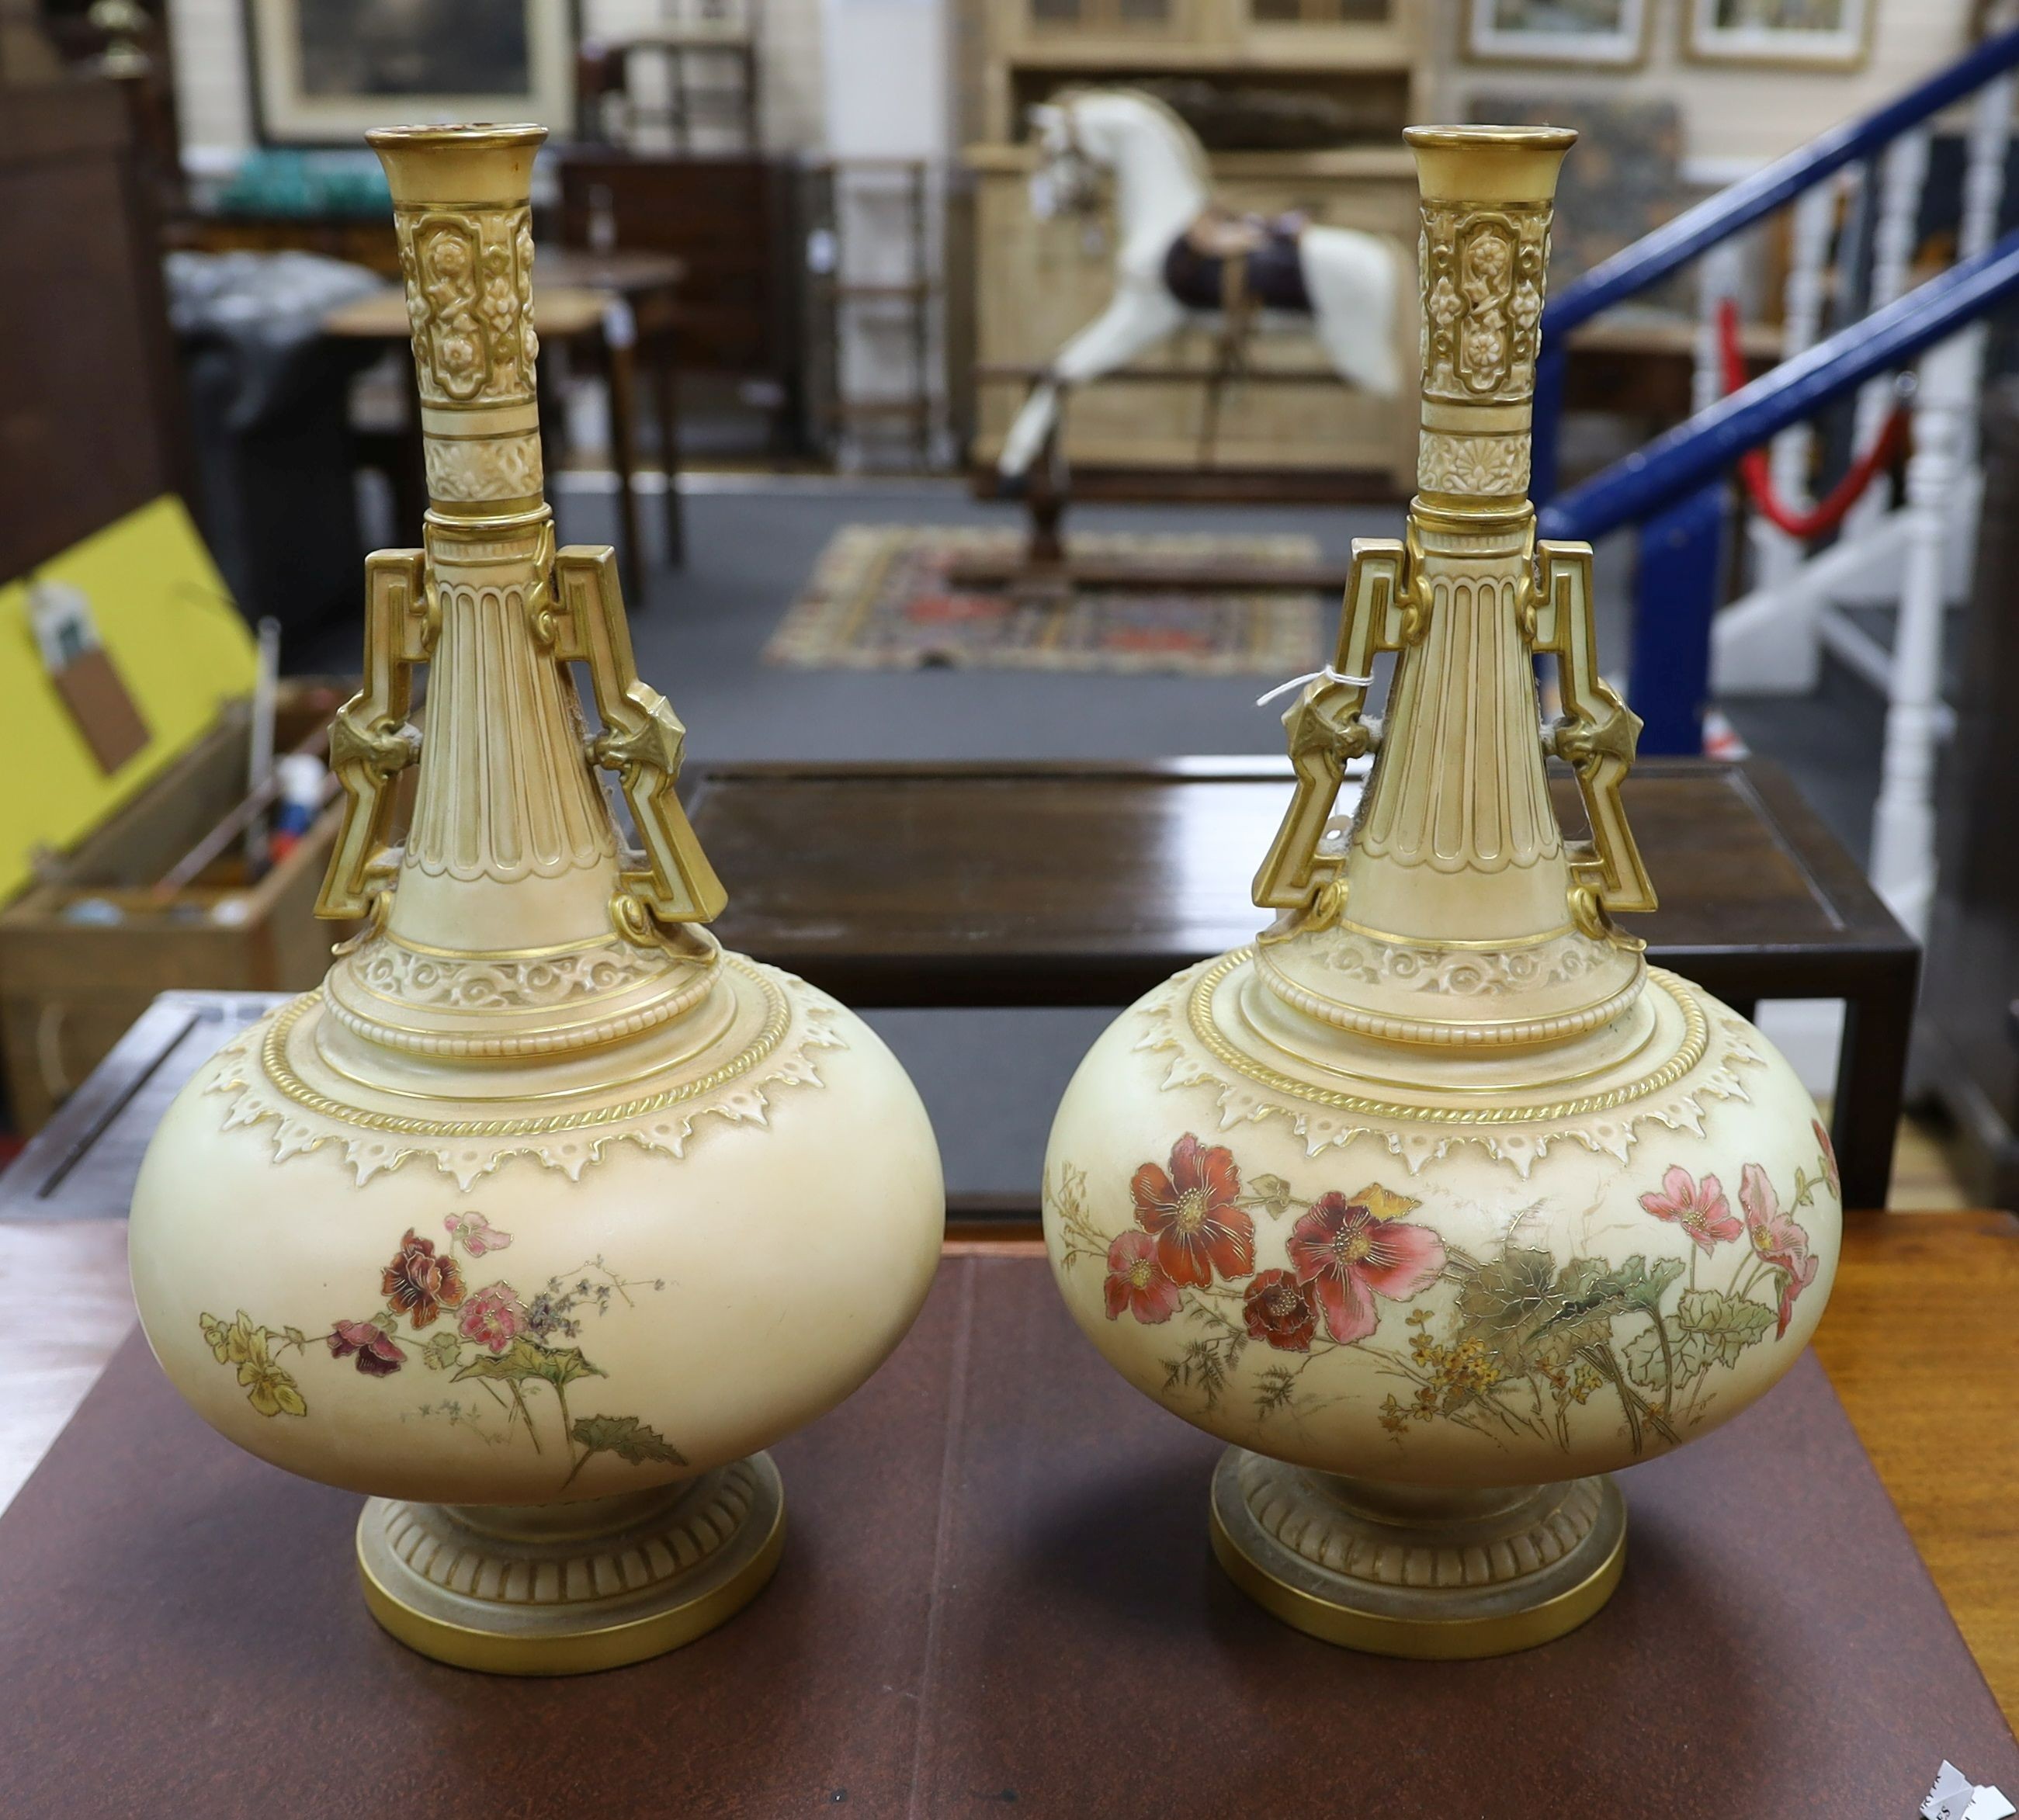 A pair of large Royal Worcester vases - 43cm tall